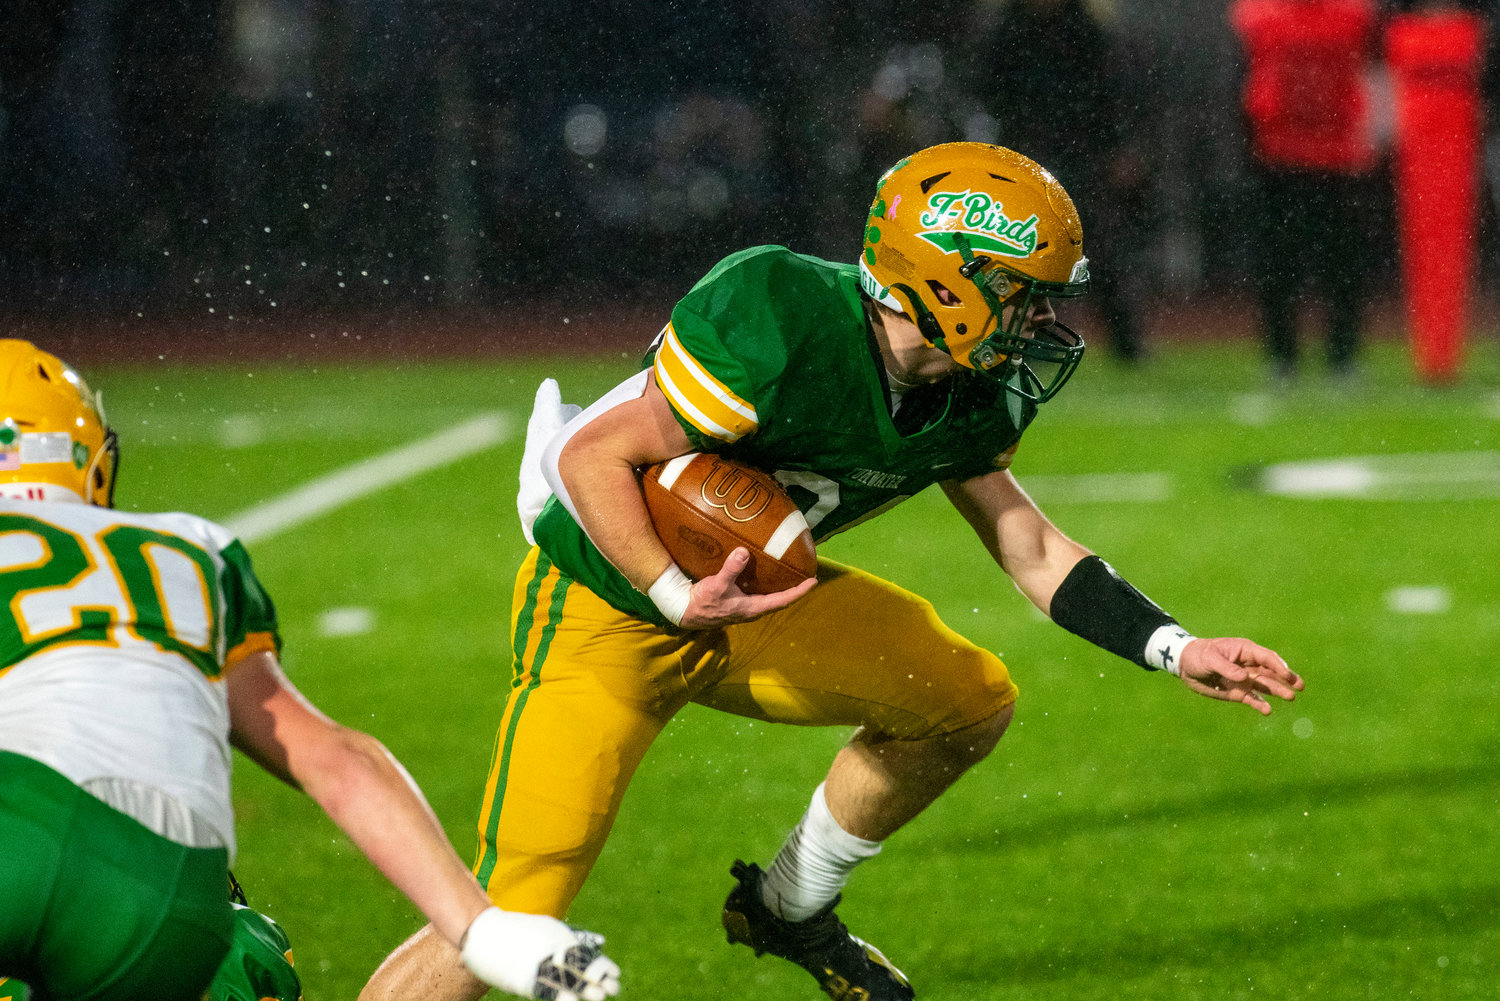 Tumwater’s Payton Hoyt looks for running room against Lynden during the 2A state title game on Dec. 4.